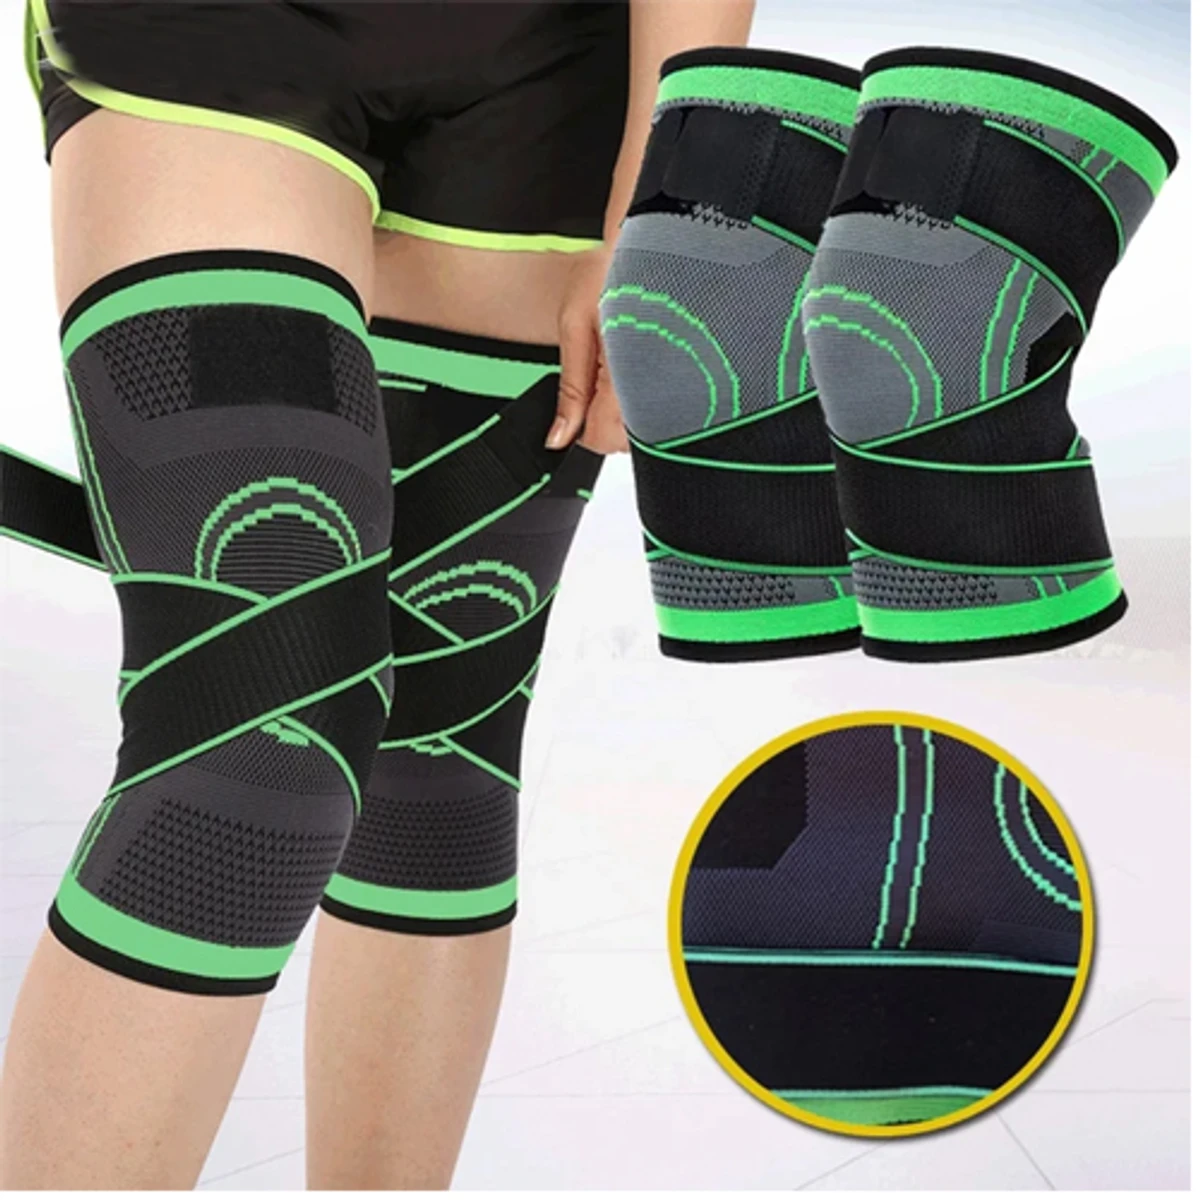 Knee Compression Sleeve for Men and Women